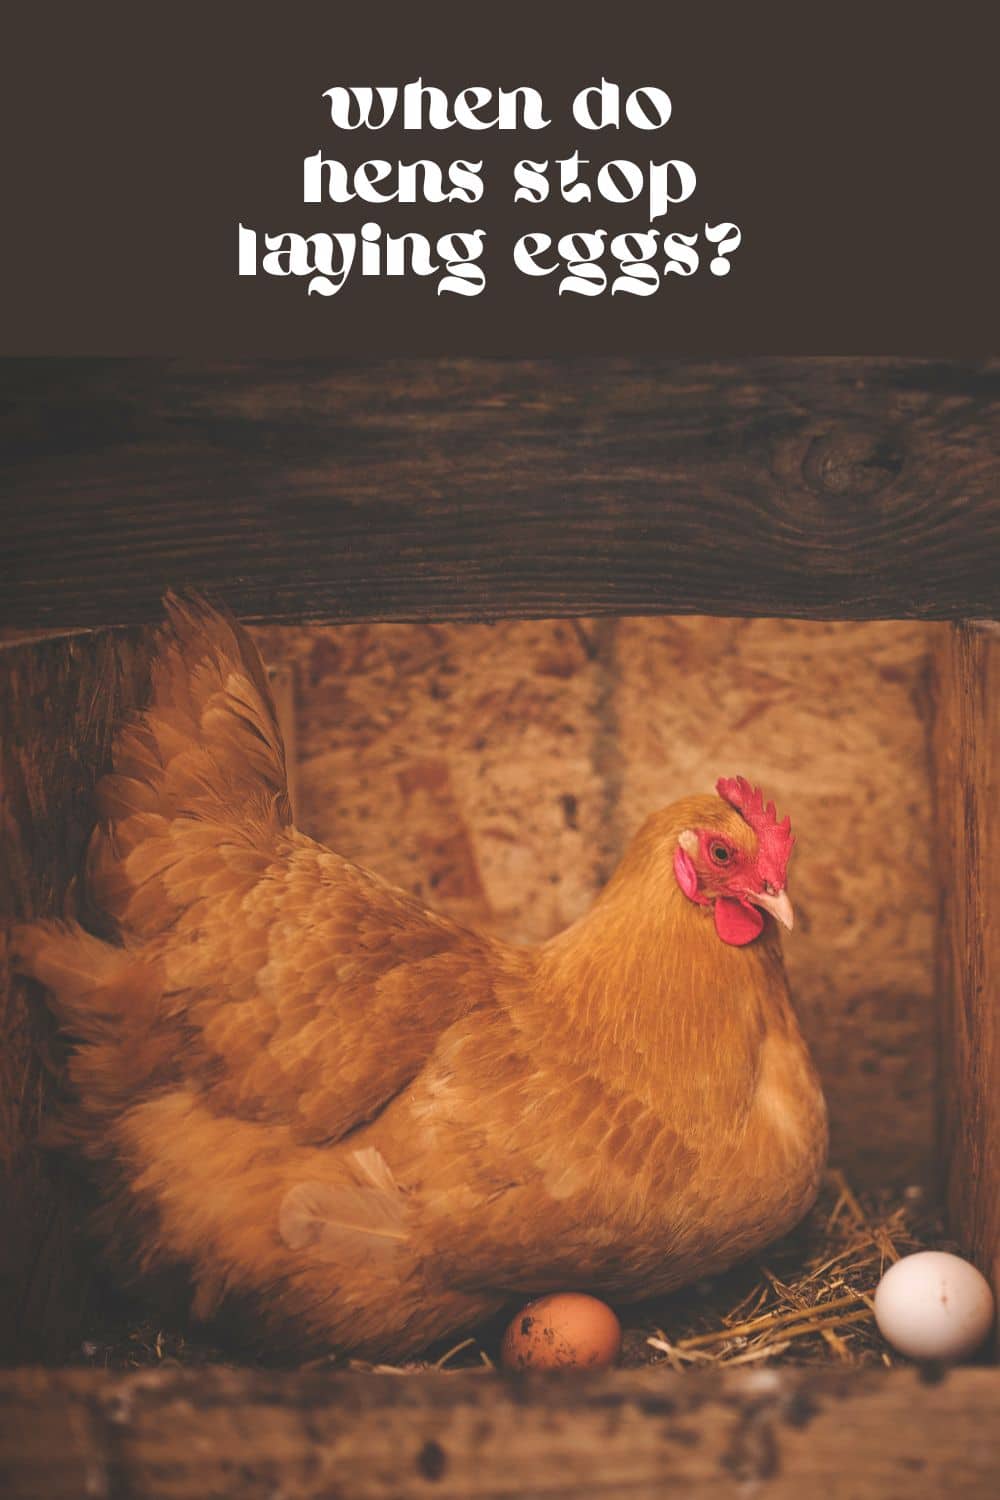 A young hen will typically begin to lay eggs at around 18-24 weeks of age, and will continue to lay eggs for several years. However, the age at which a hen stops laying eggs can vary depending on several factors. This is a common question and concern in backyard flocks wanting to collect as many fresh eggs as possible.